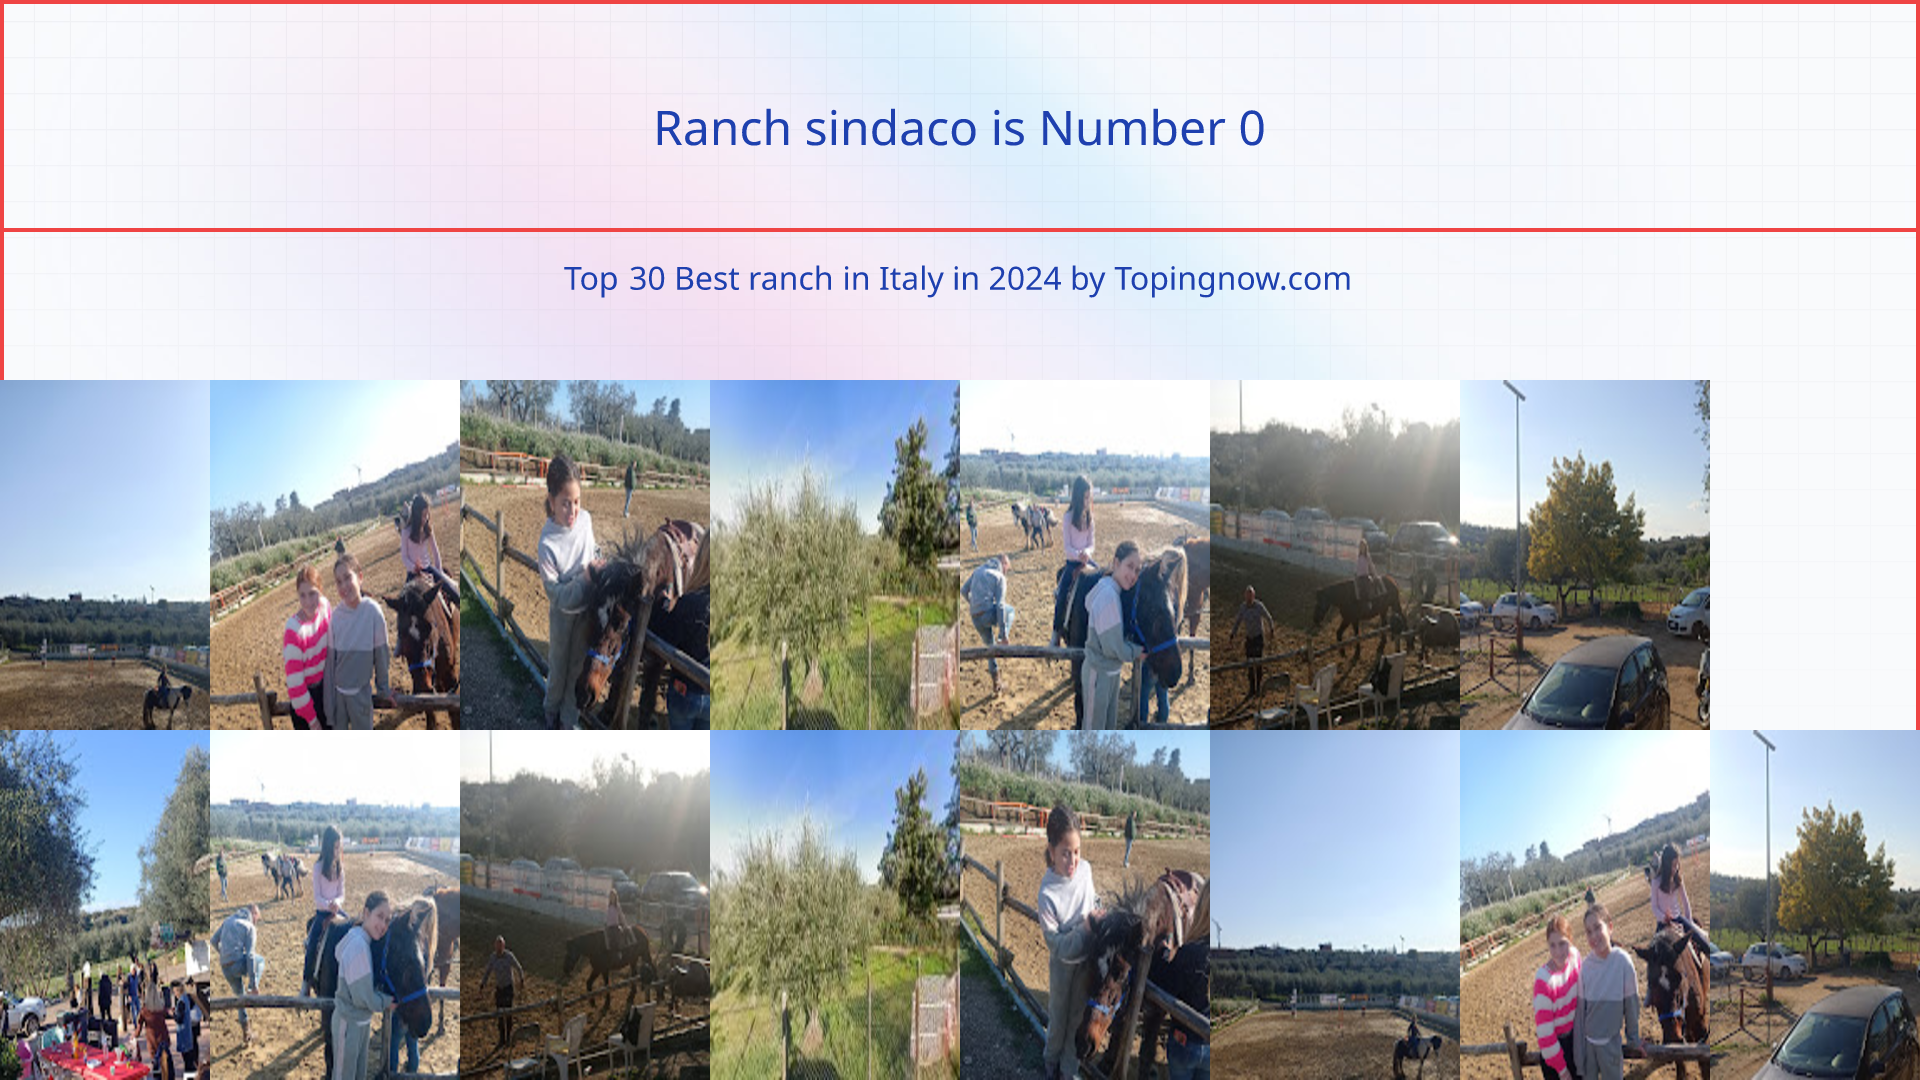 Ranch sindaco: Top 30 Best ranch in Italy in 2024